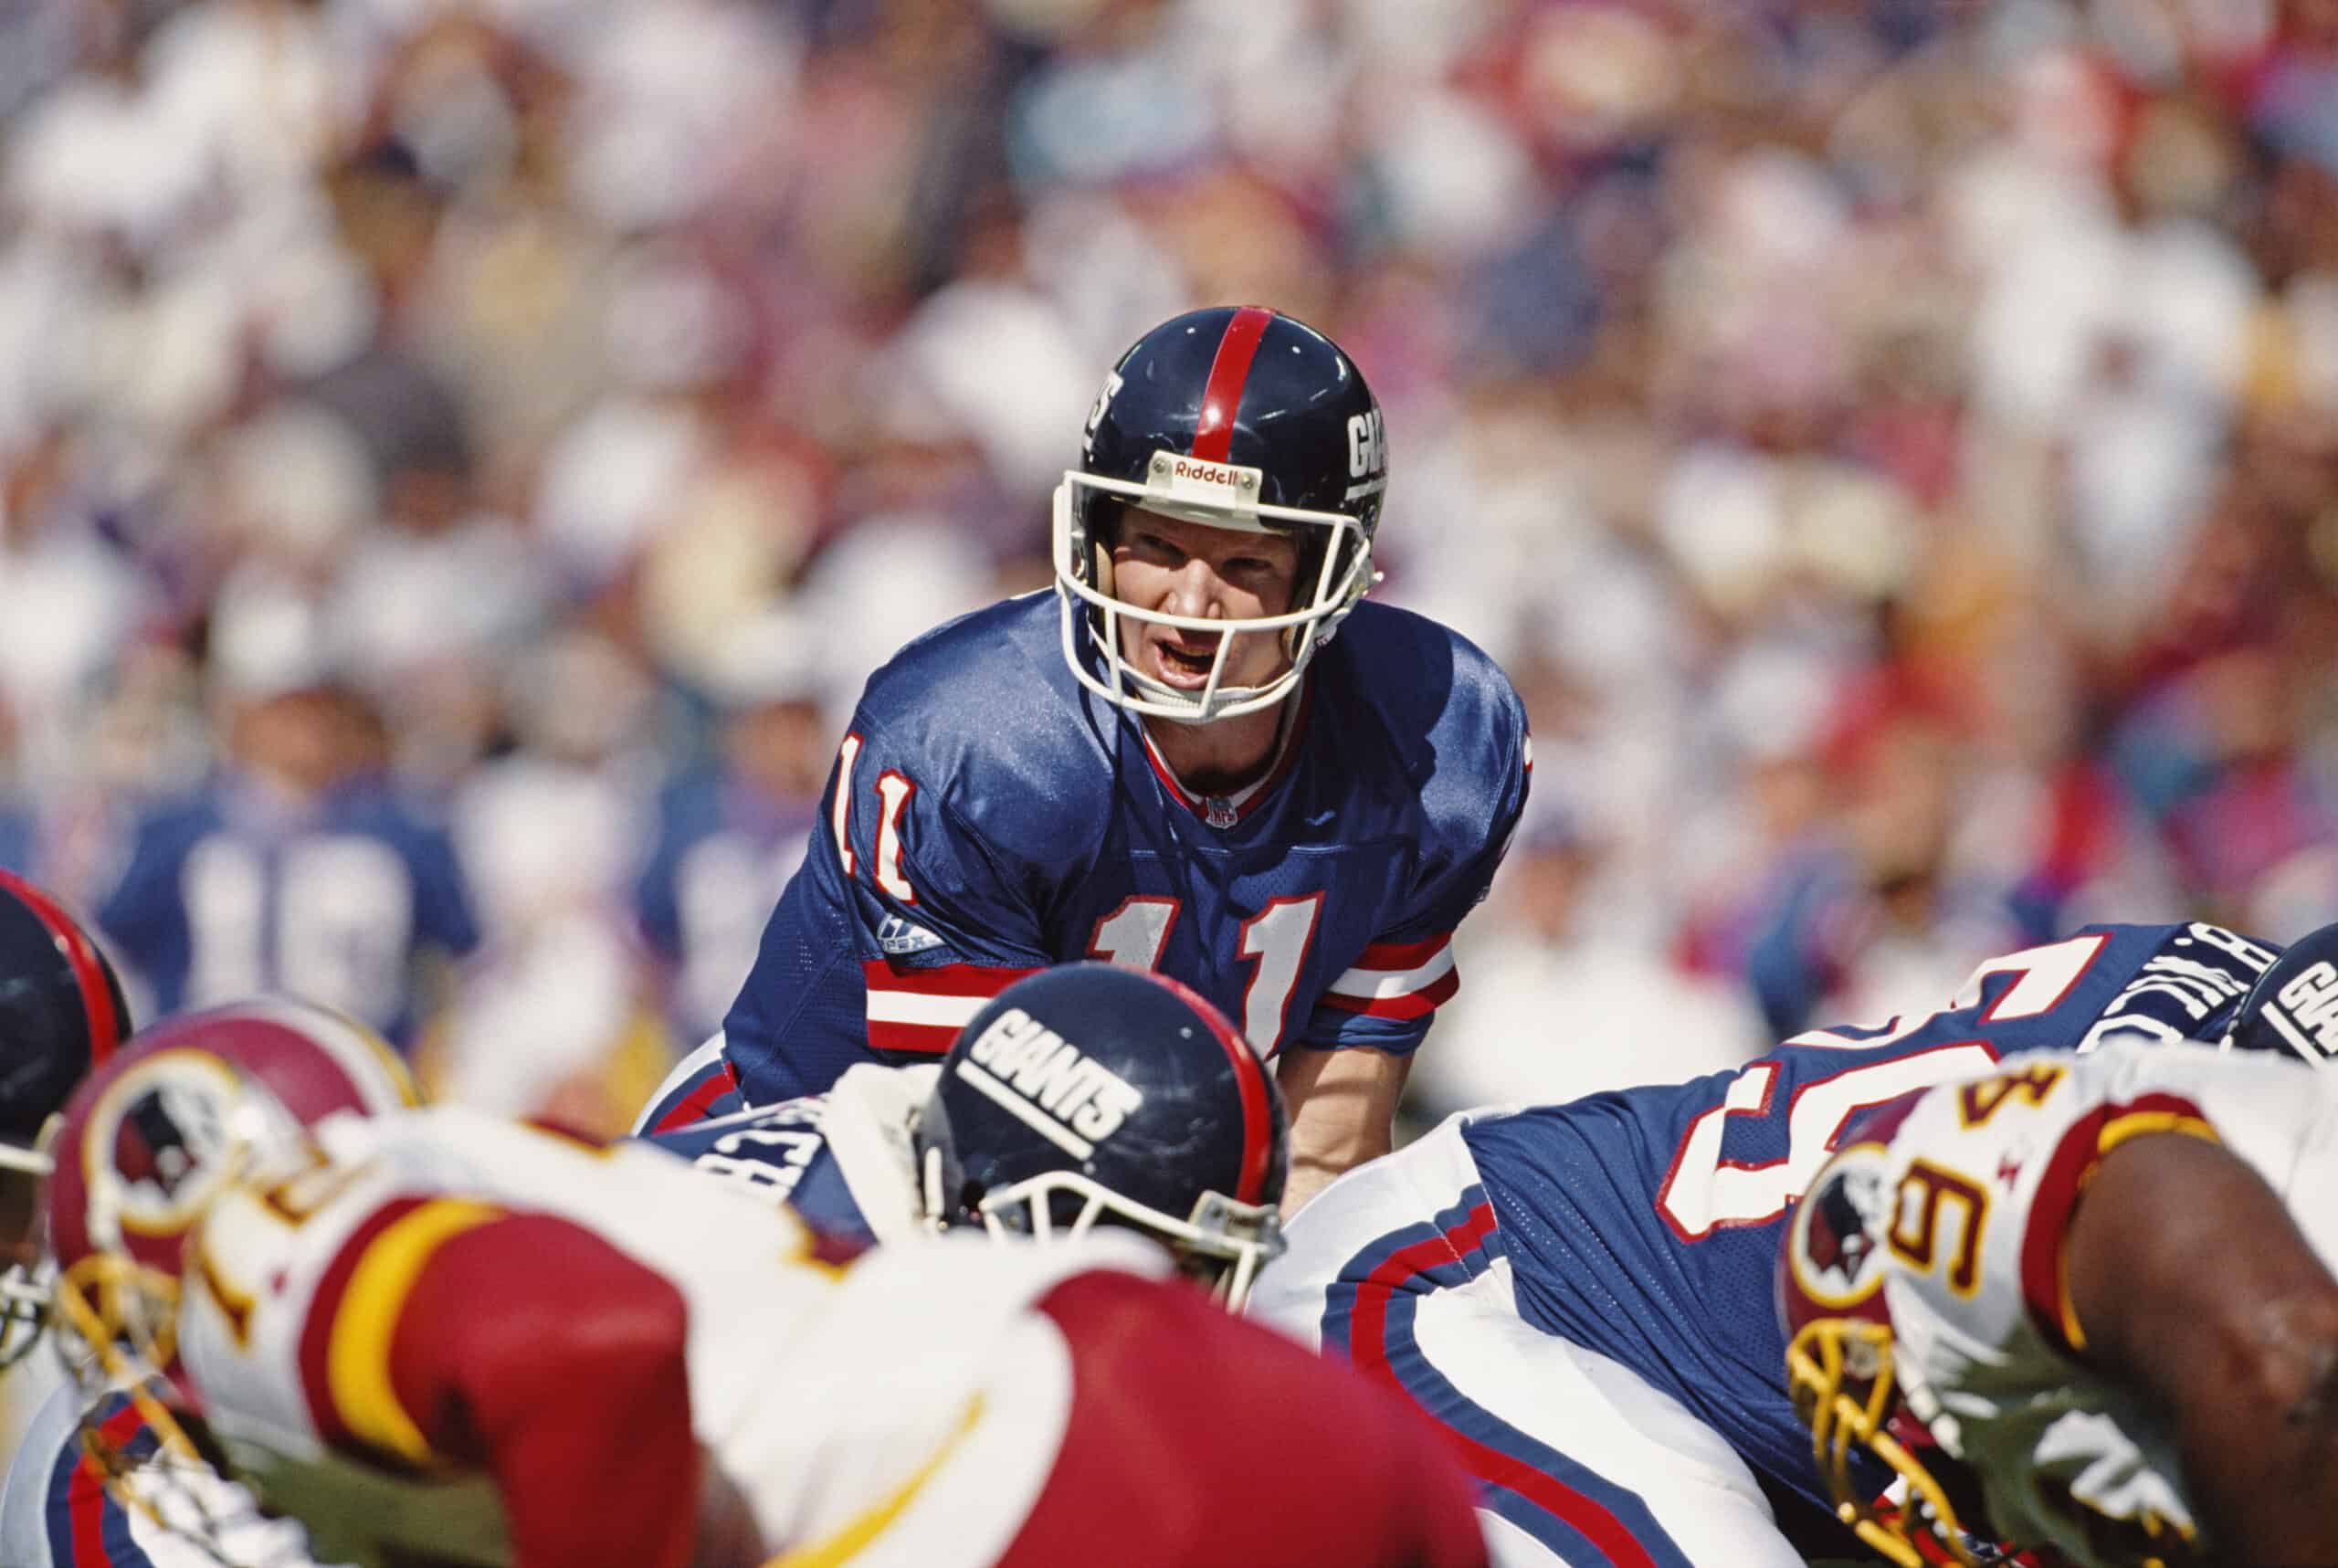 Phil Simms #11, Quarterback for the New York Giants calls the play during the National Football Conference East game against the Washington Redskins on 10th October 1993 at the Giants Stadium, East Rutherford, New Jersey, United States. The Giants won the game 41 - 7.  (Photo by Rick Stewart/Allsport/Getty Images)